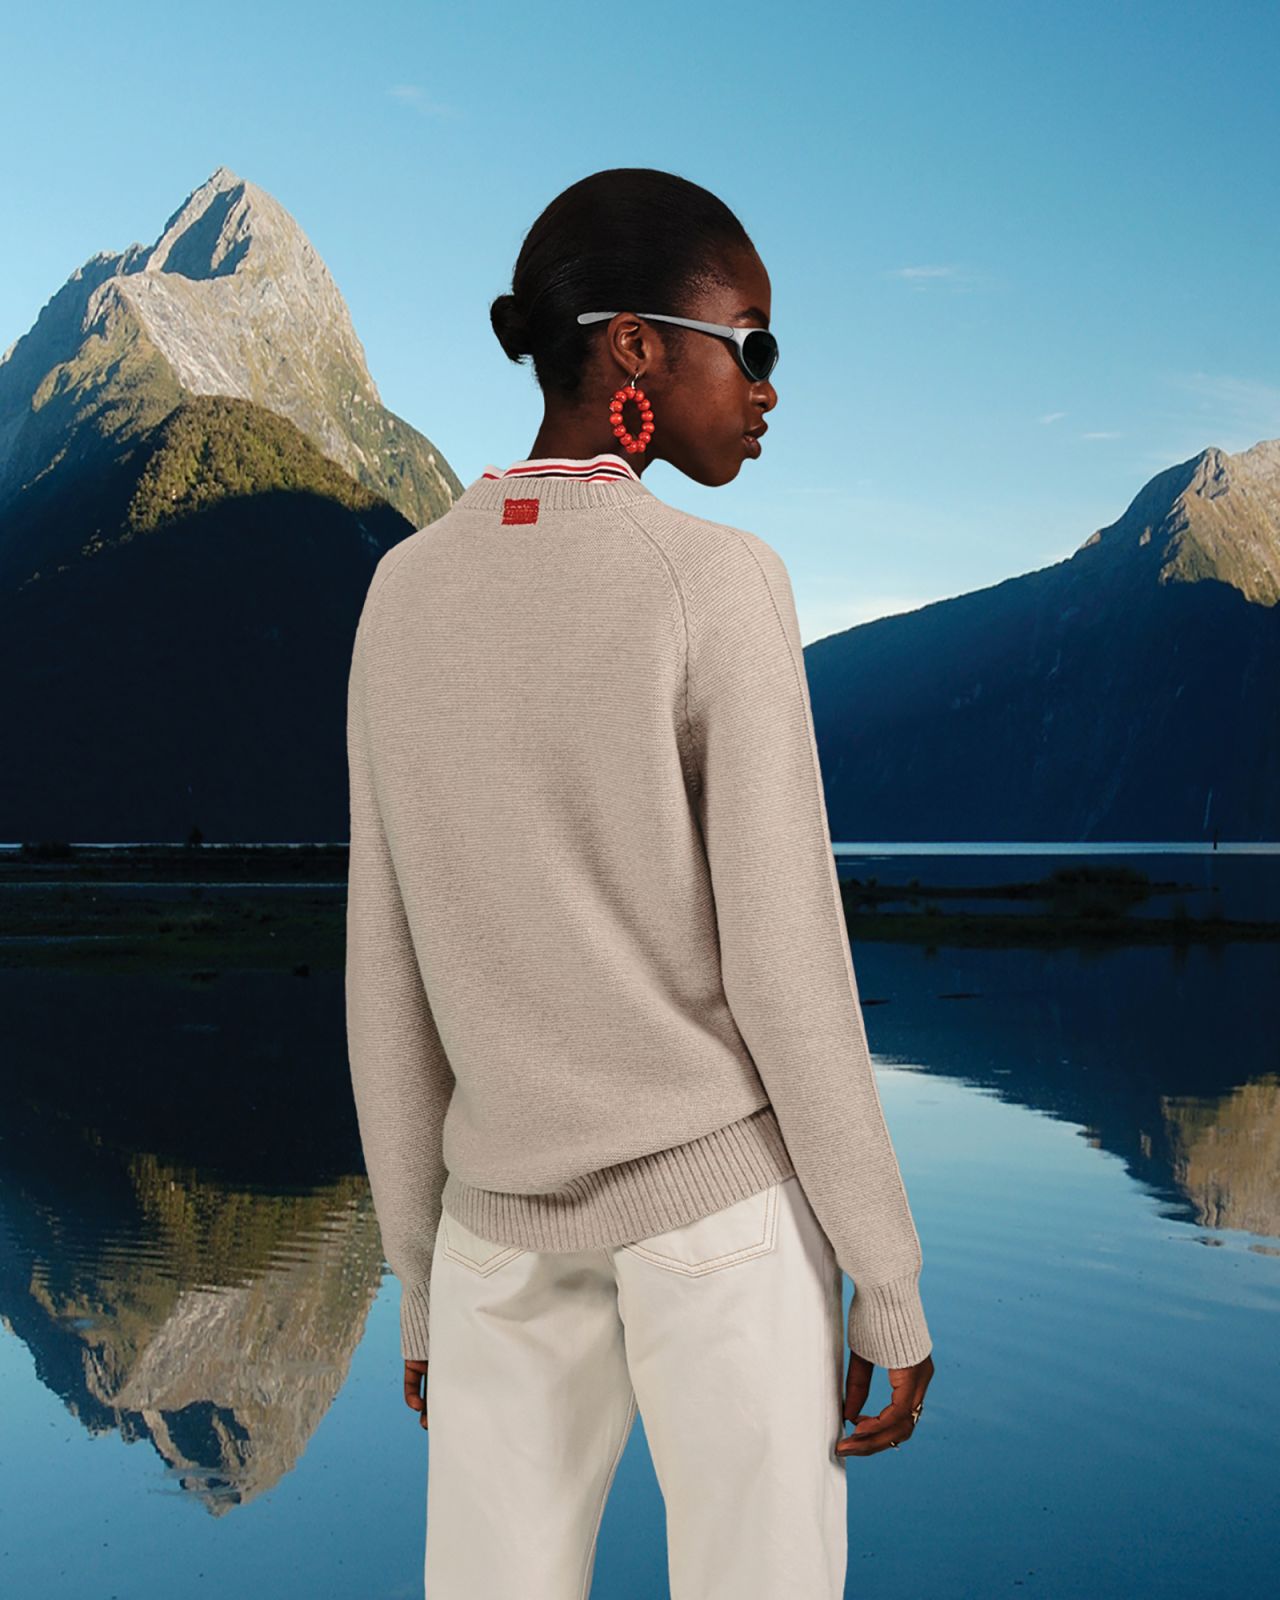 Sheep Inc. designs knitwear that is intended to last a lifetime. 